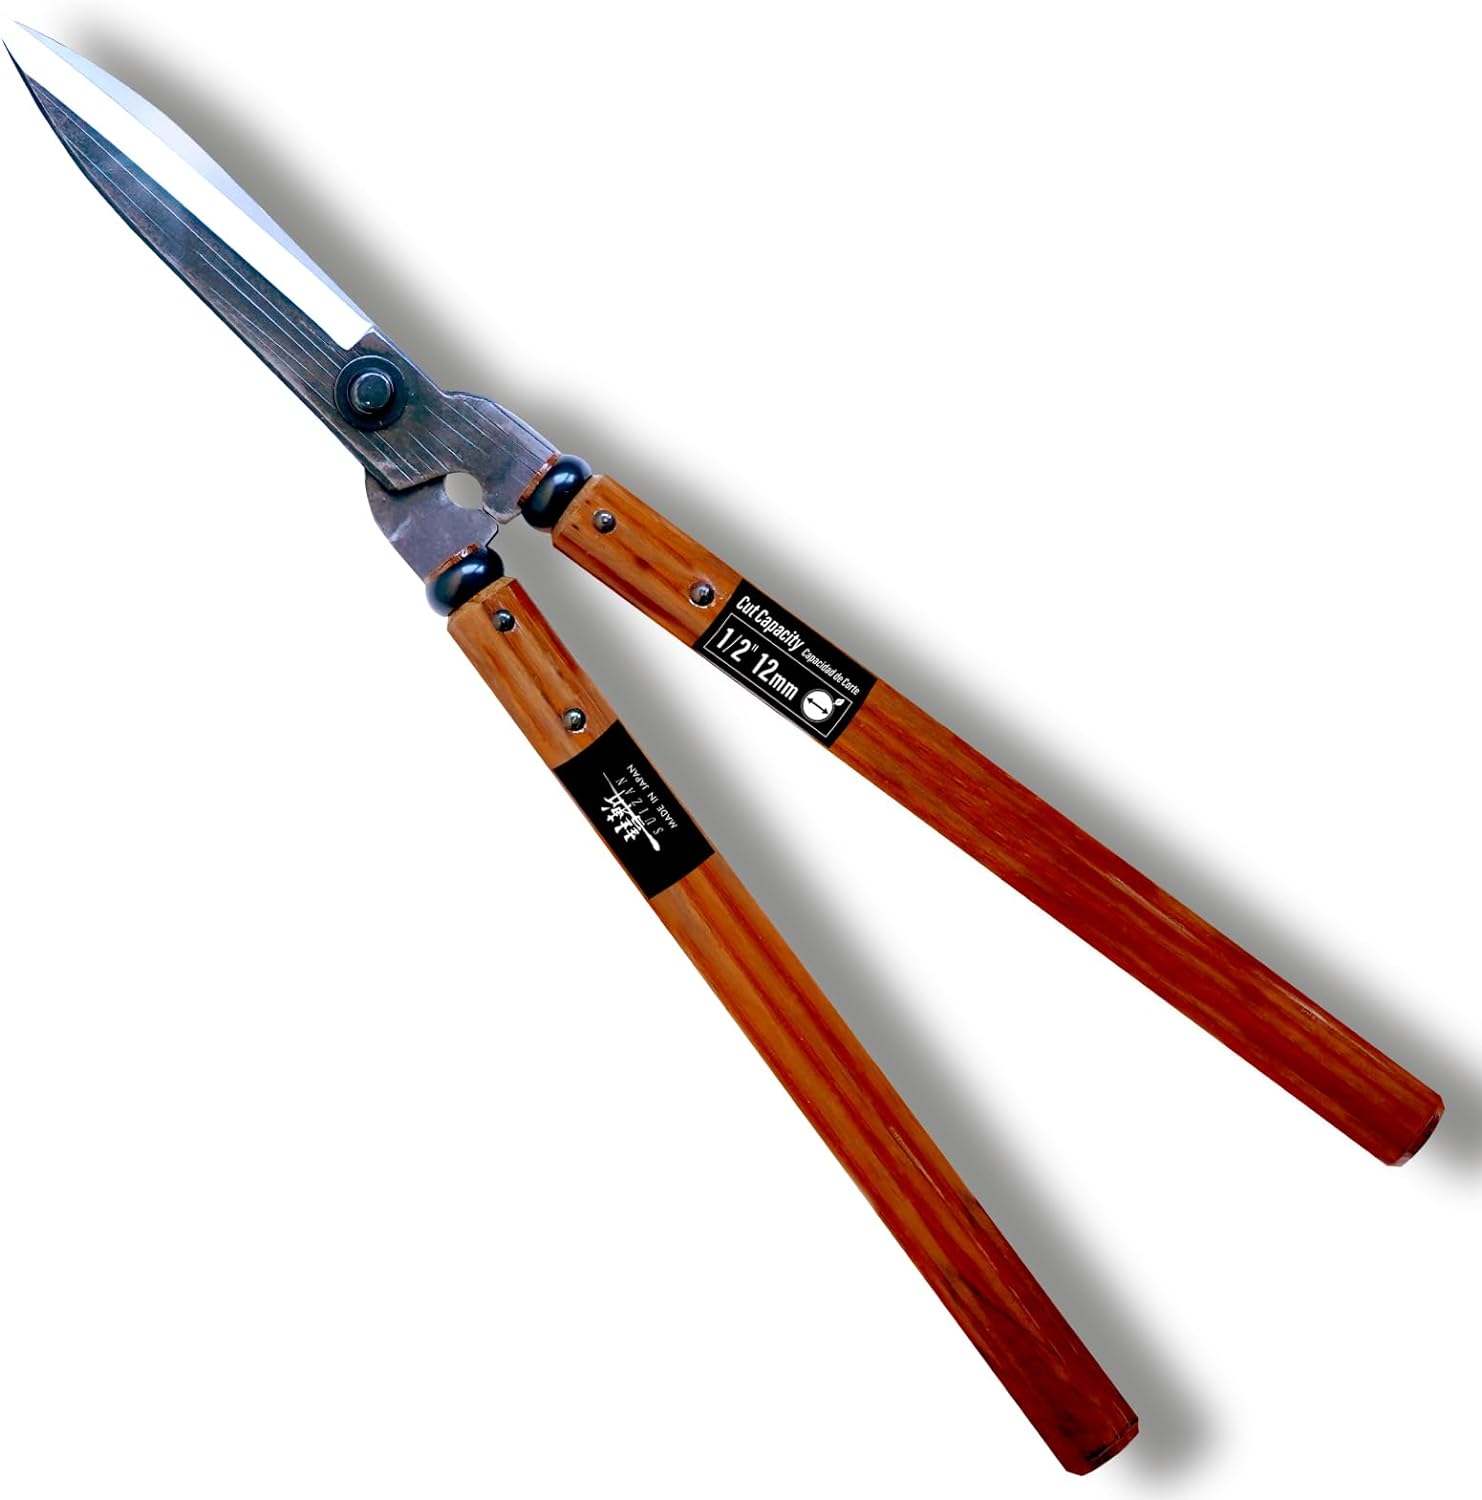 SUIZAN Japanese Hedge Shears 21.3' - Professional Garden Clippers for Precise Trimming Massage Lab